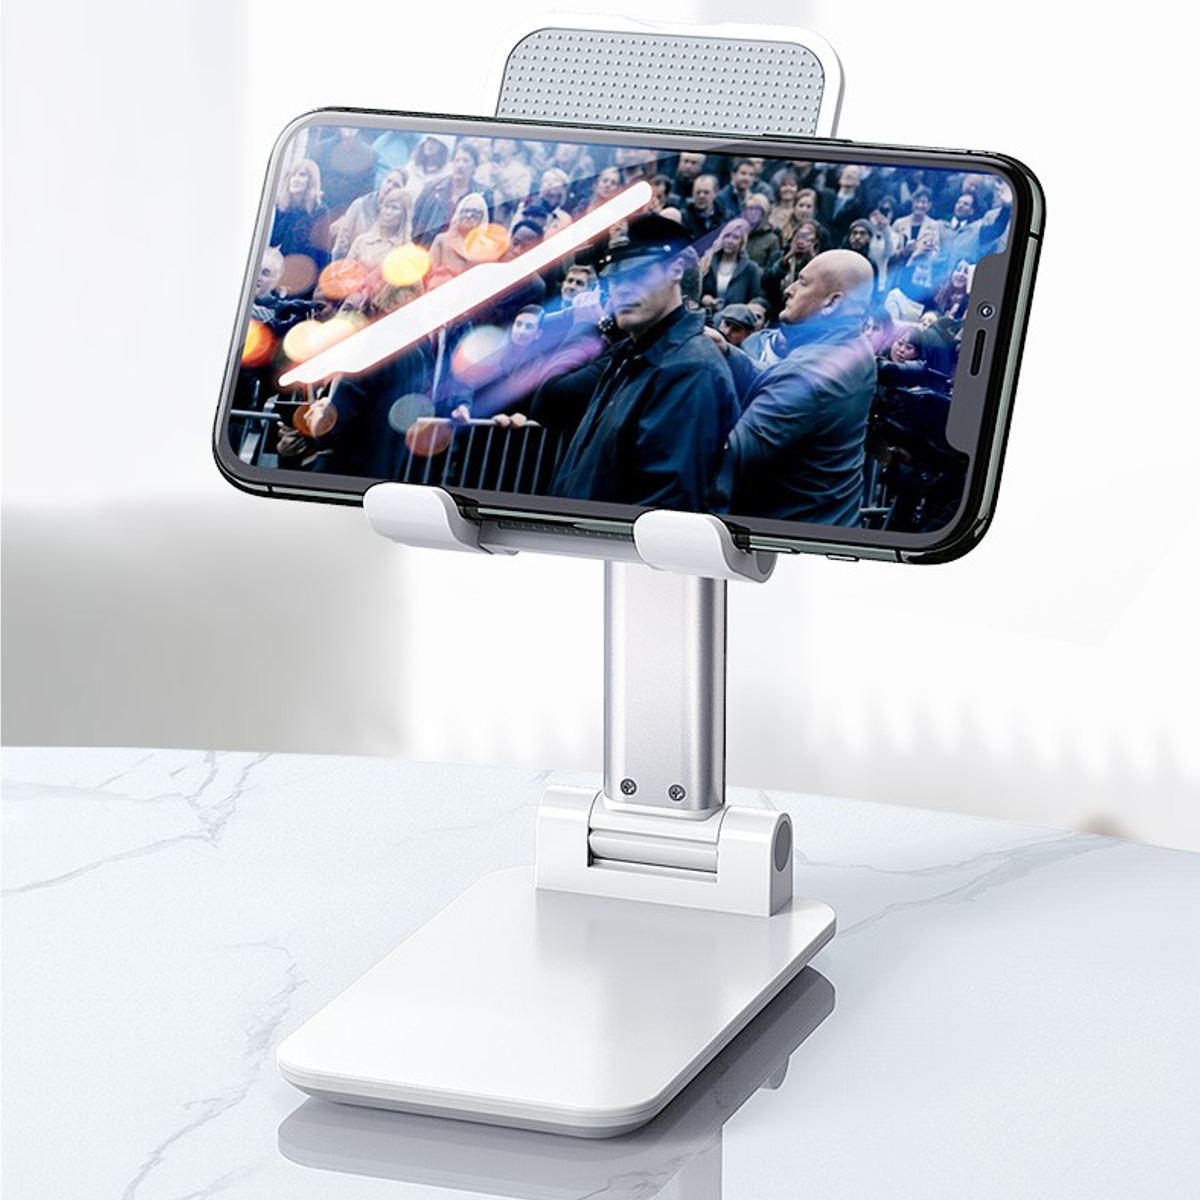 CCT4-Universal-Folding-Telescopic-Desktop-Mobile-Phone-Tablet-Holder-Stand-for-iPad-Air-for-iPhone-1-1811828-3